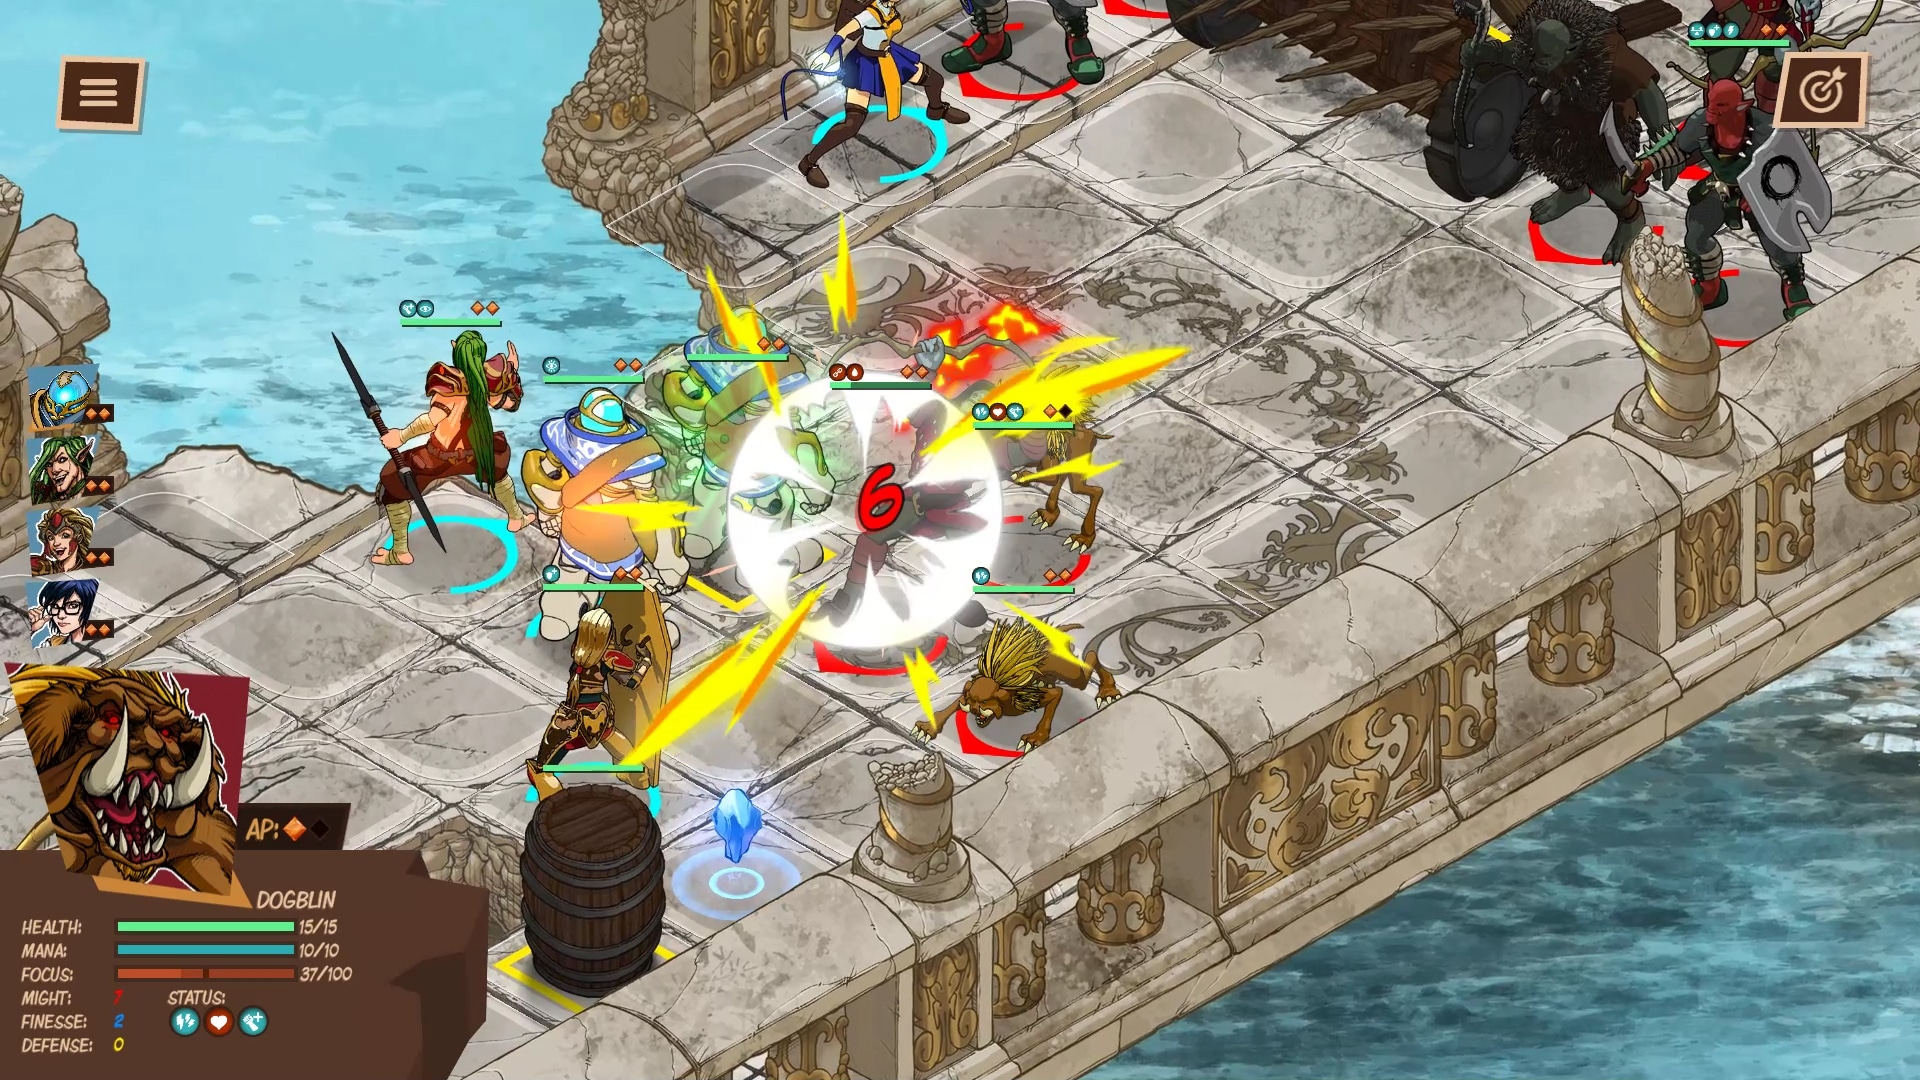 Spielesoftware »Reverie Knights Tactics«, PlayStation 4